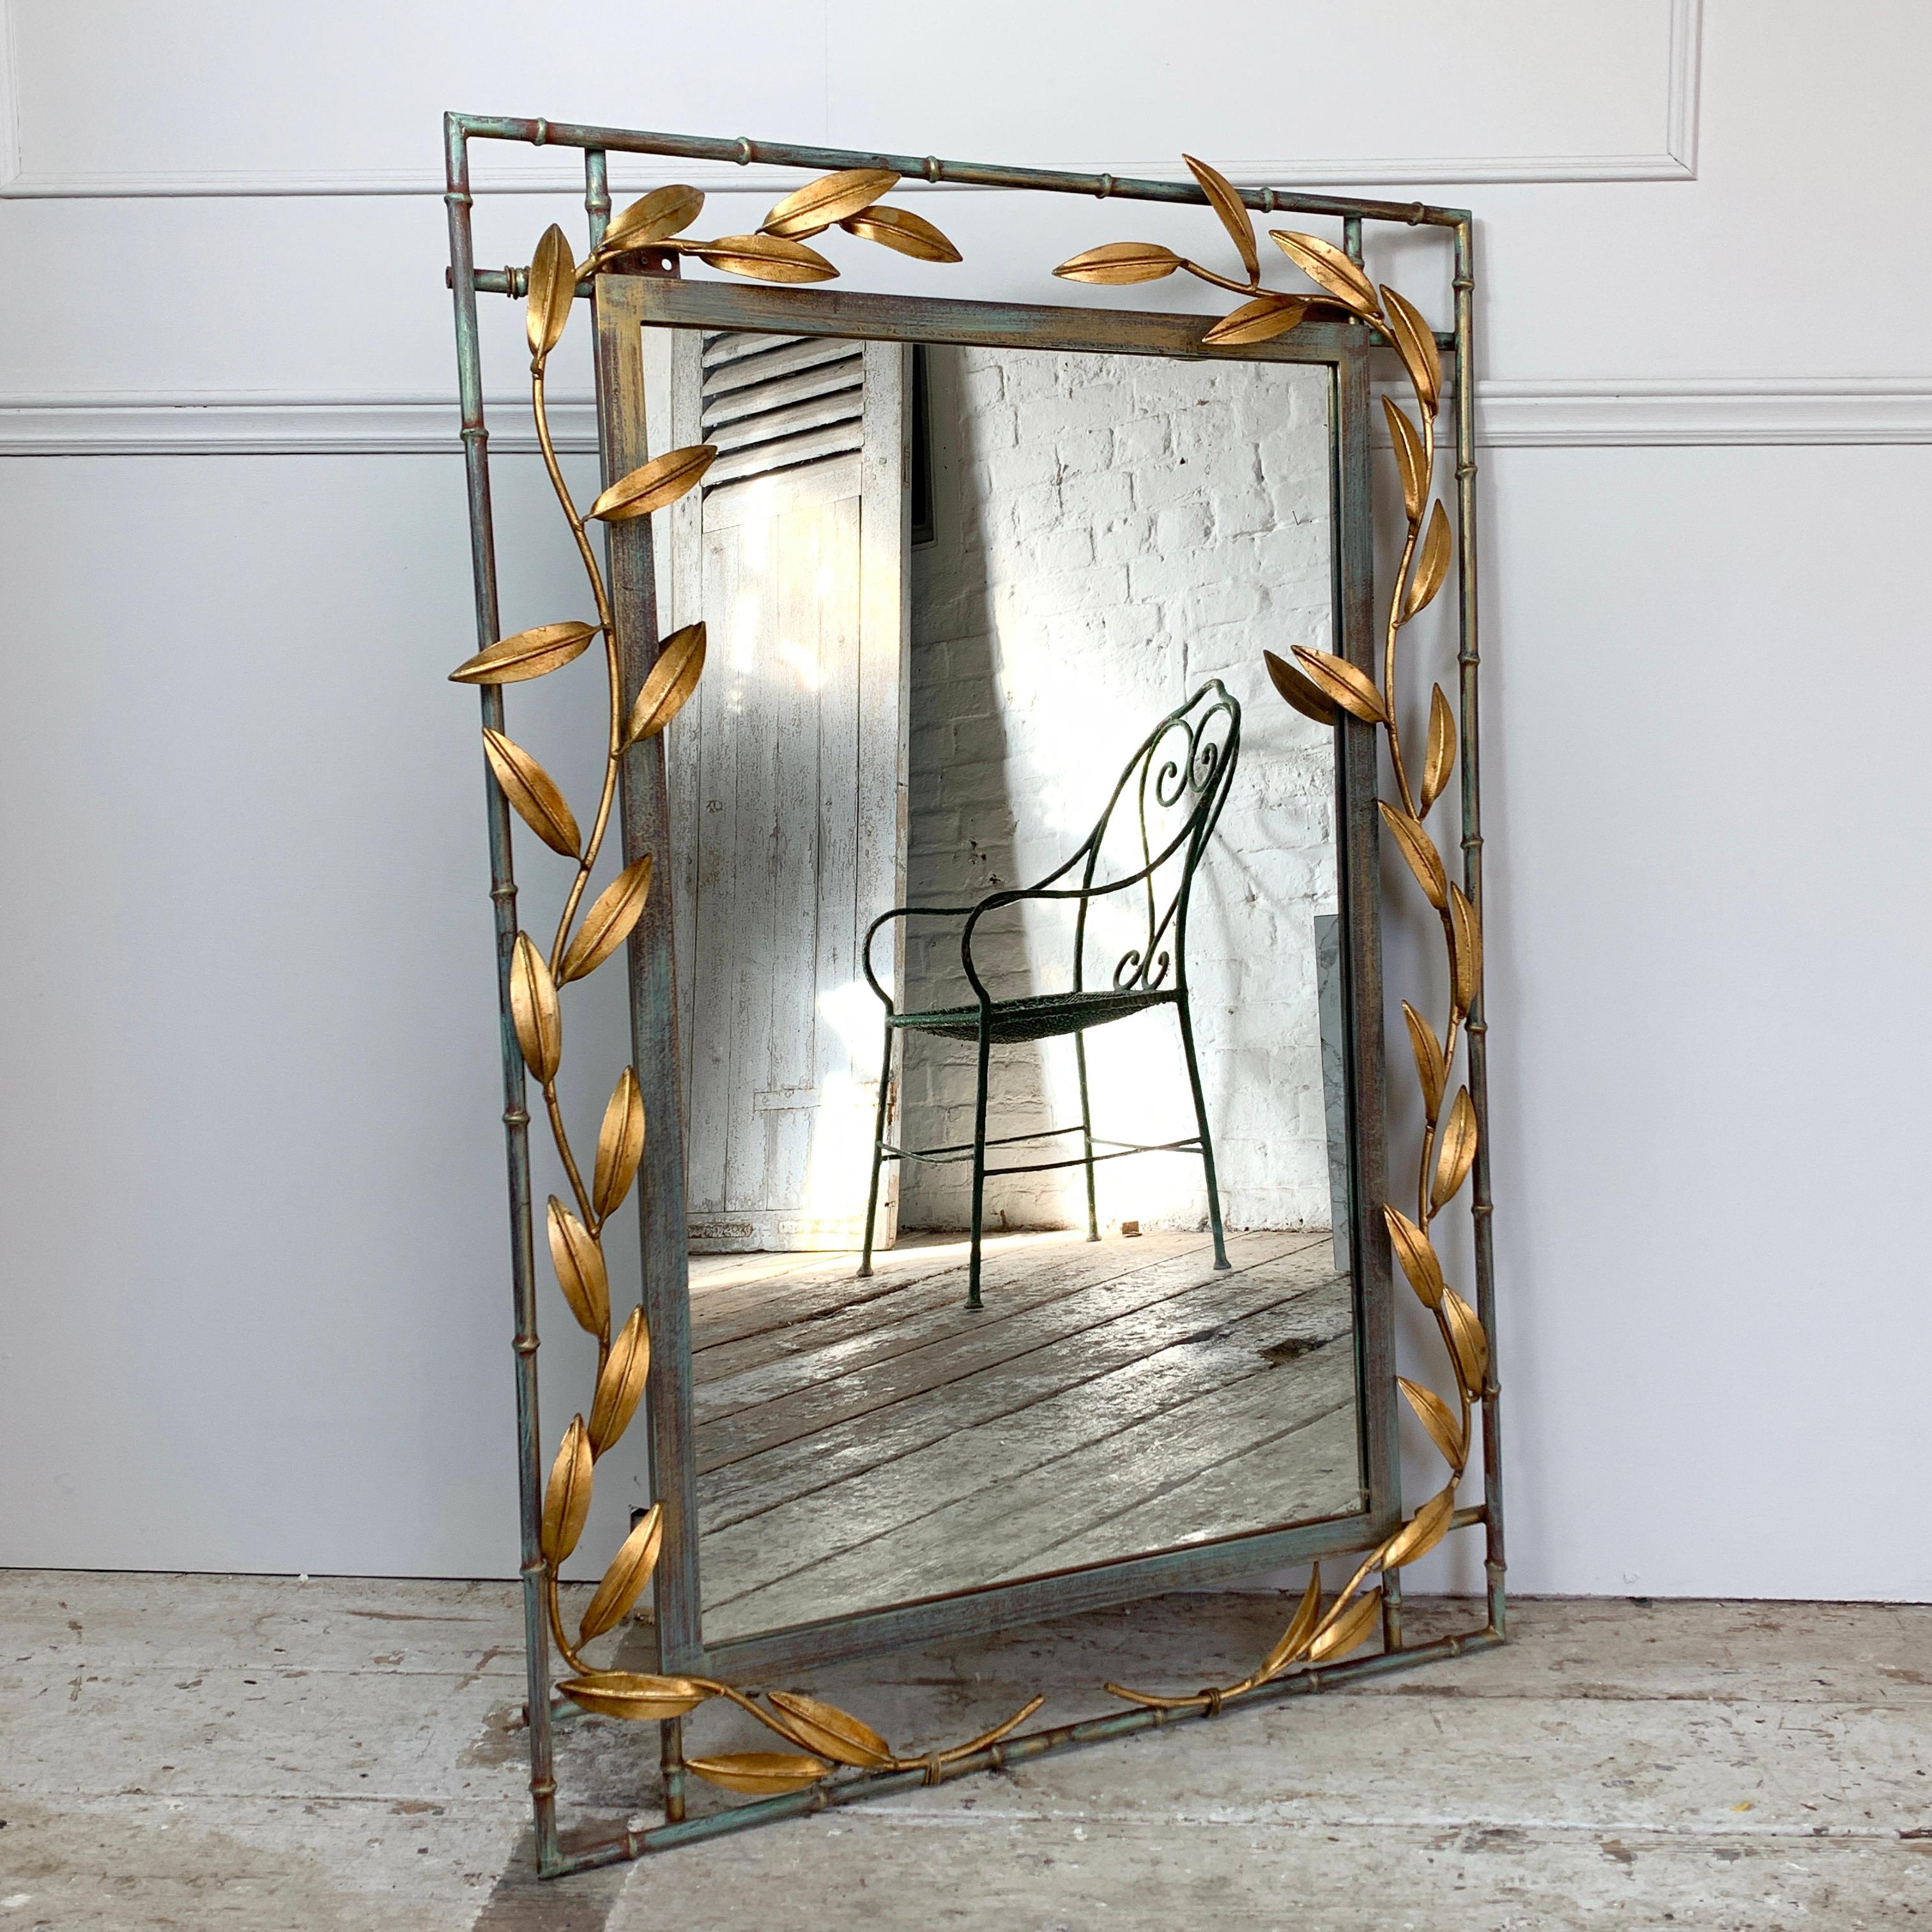 Gilt leaf and faux bamboo mirror
circa 1970s-1980s

Fantastic stems of leaves surround the mirror frame in bright gold leaf finish
The faux bamboo mirror frame itself in metal with mixed tones of color to the finish
There are hanging hooks to the